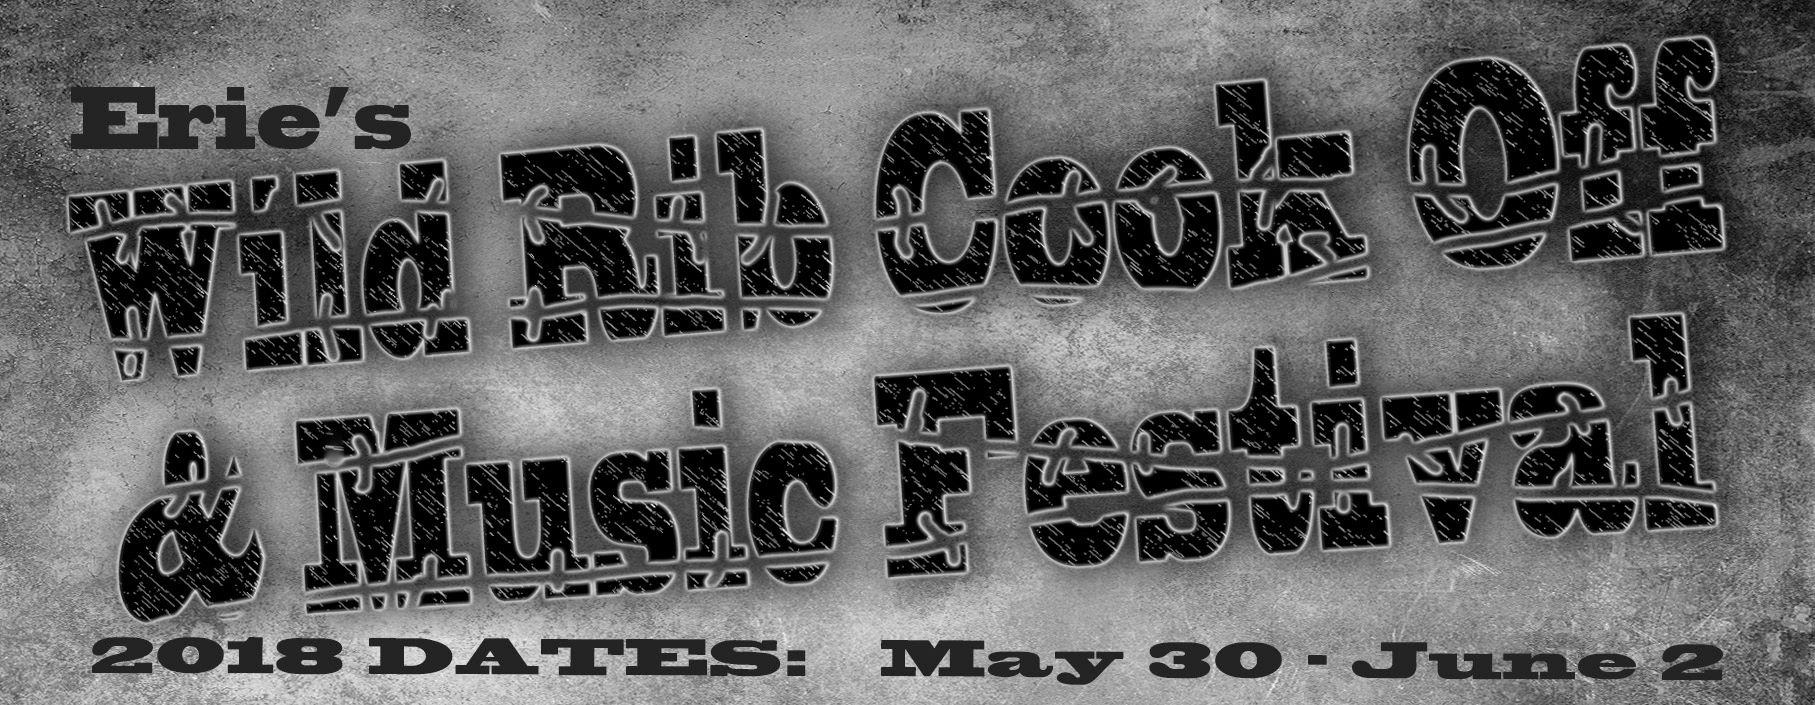 2018 Erie Wild Rib Cook Off and Music Festival